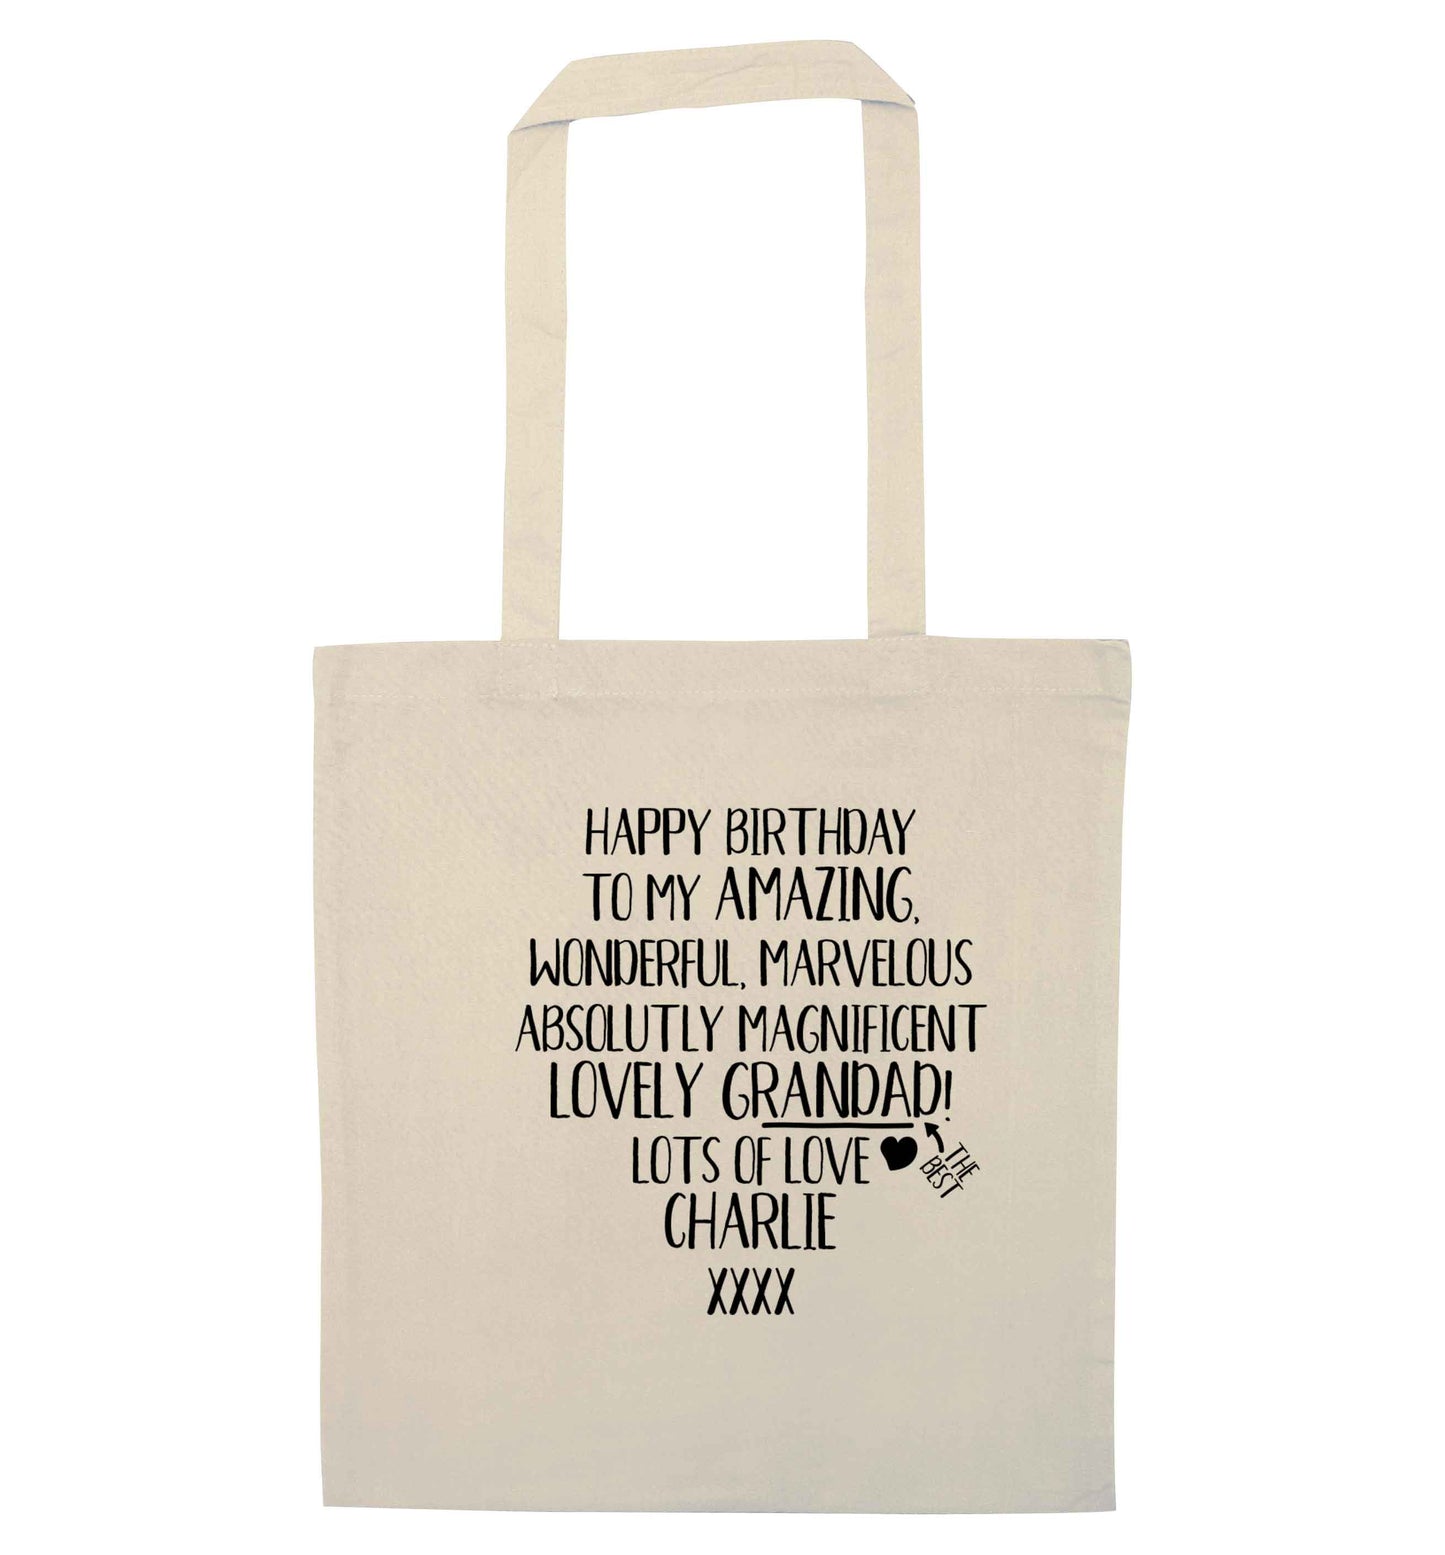 Personalised happy birthday to my amazing, wonderful, lovely grandad natural tote bag